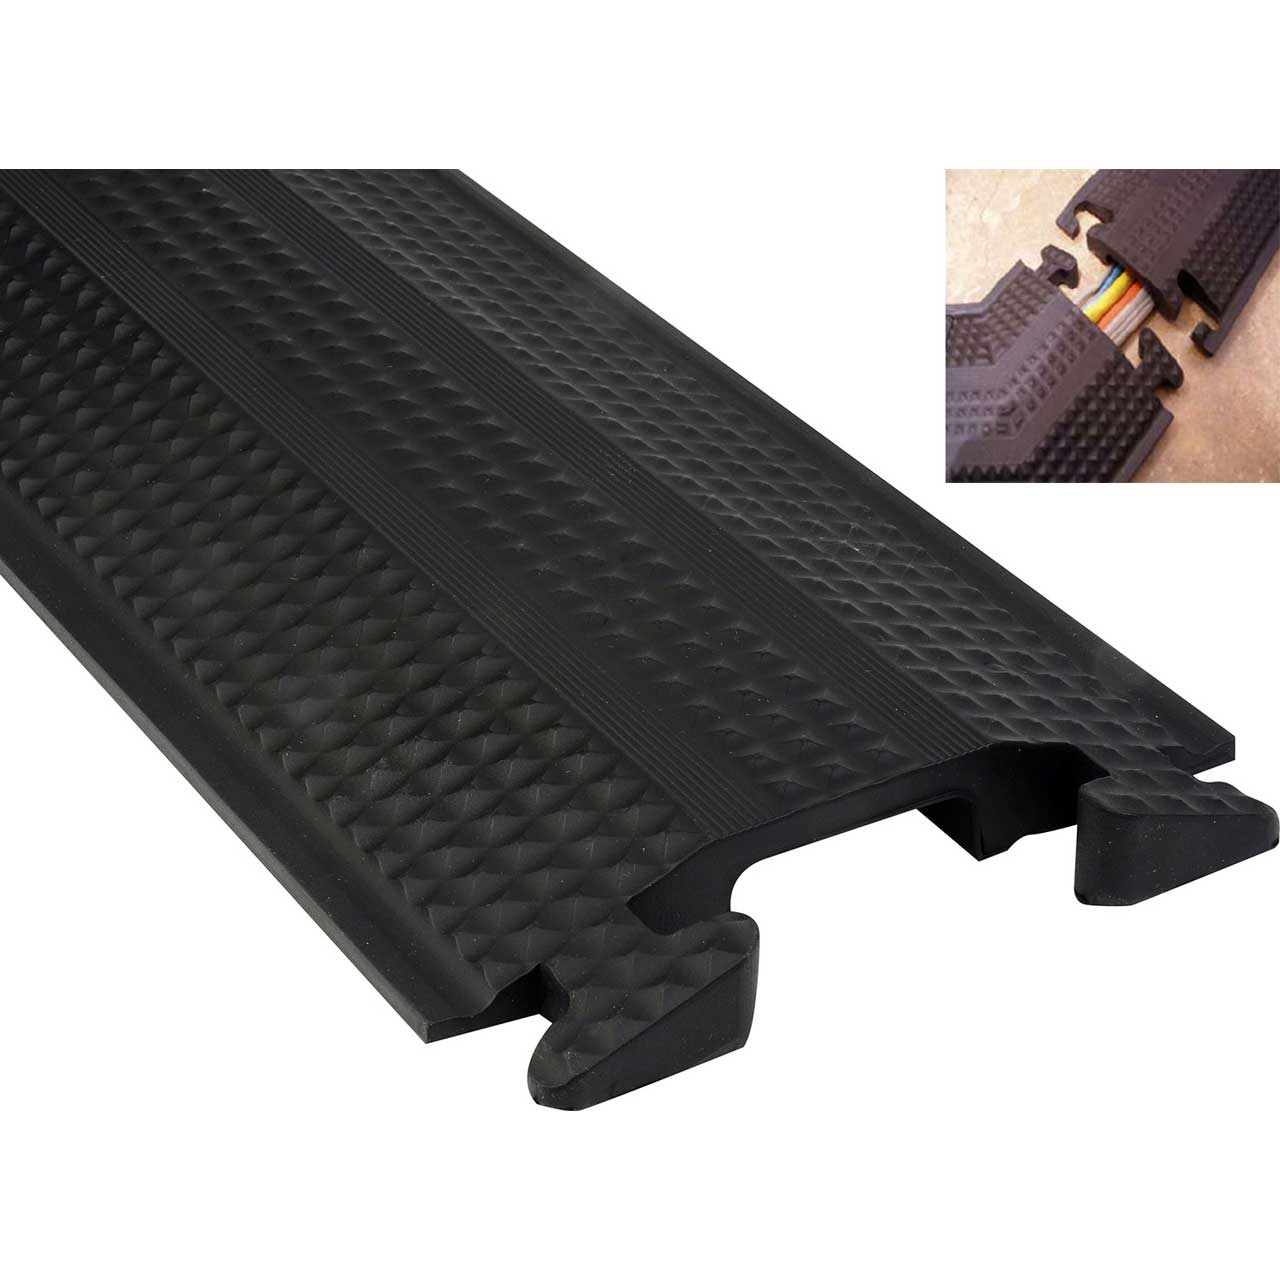 Neoprene Floor Cord Cover and Protector 